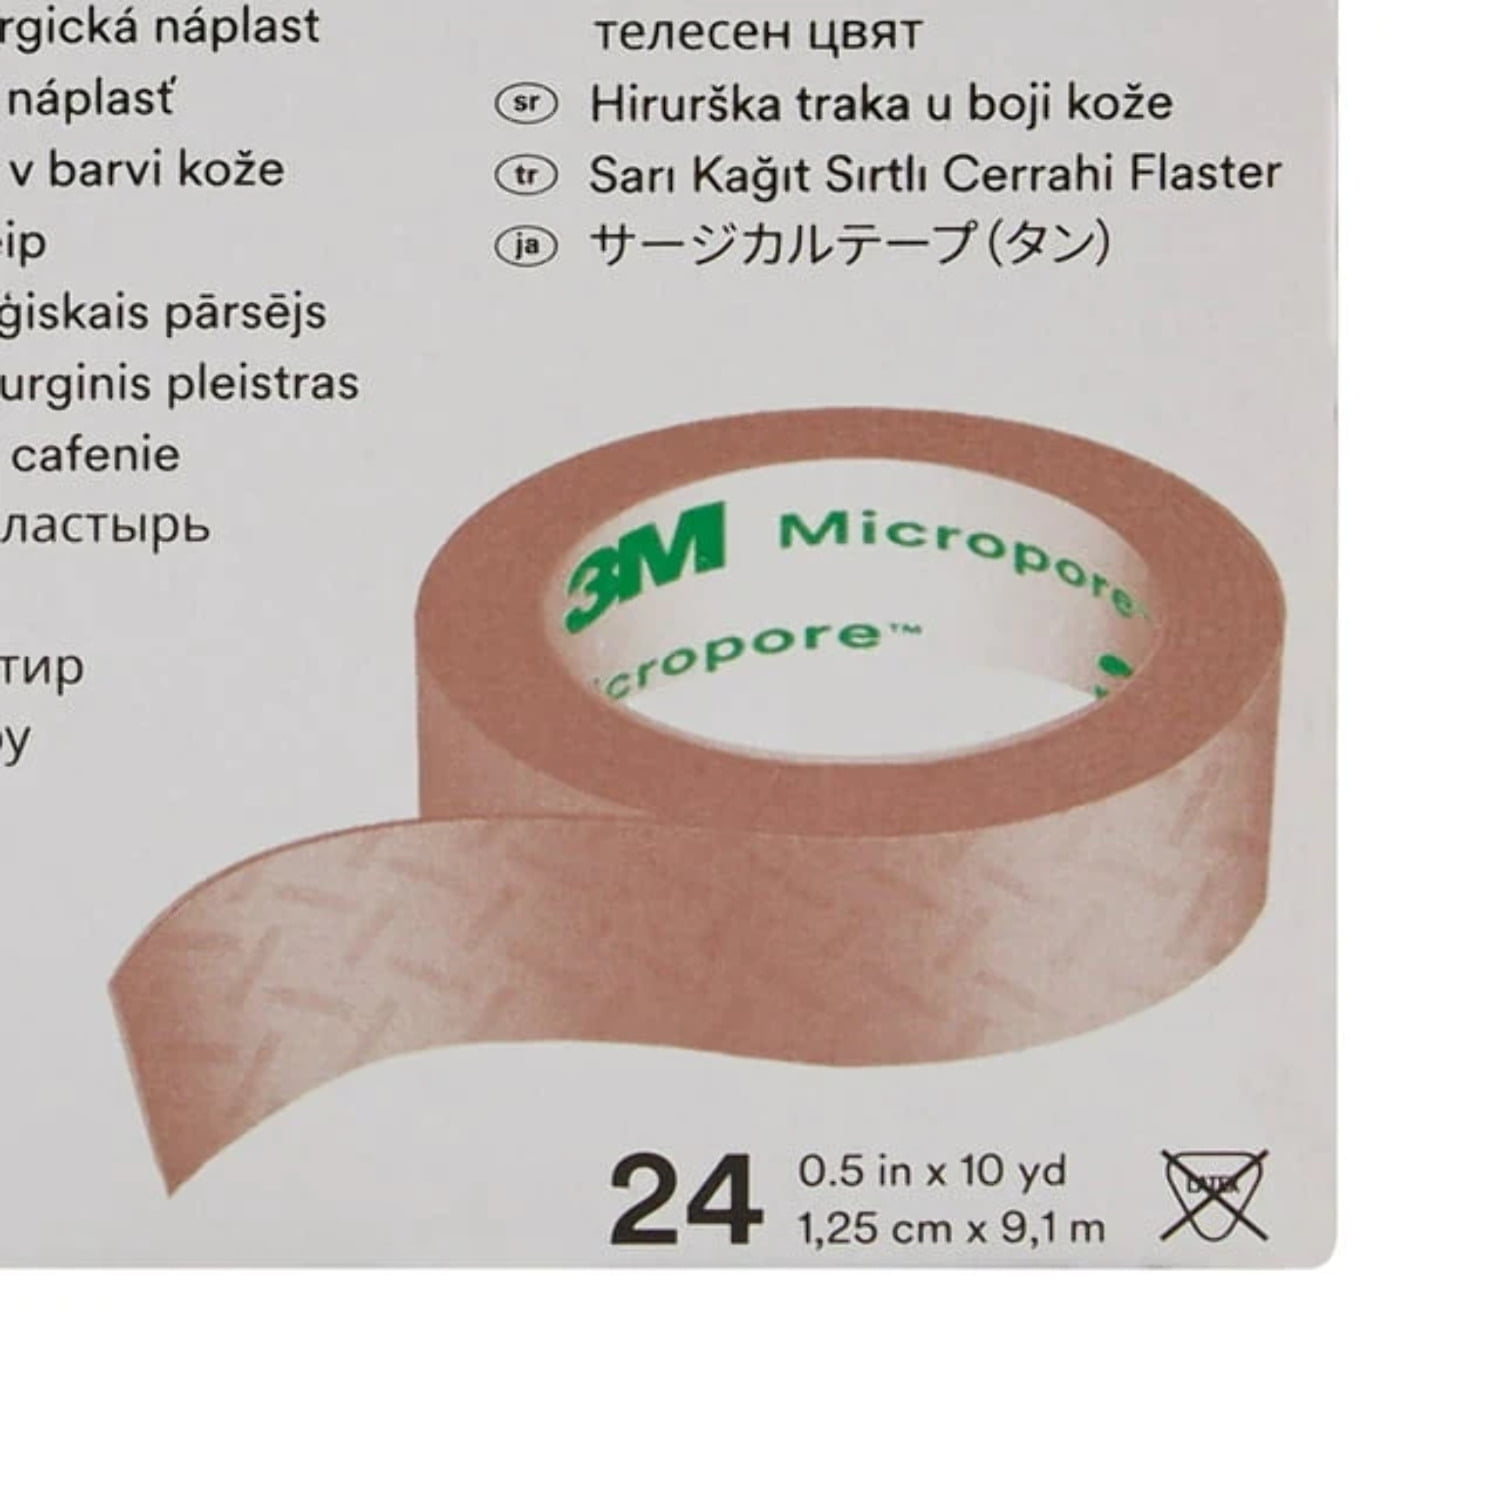 Buy 3M HEALTHCARE MICROPORE 3 INCH PAPER SURGICAL TAPE Online & Get Upto  60% OFF at PharmEasy